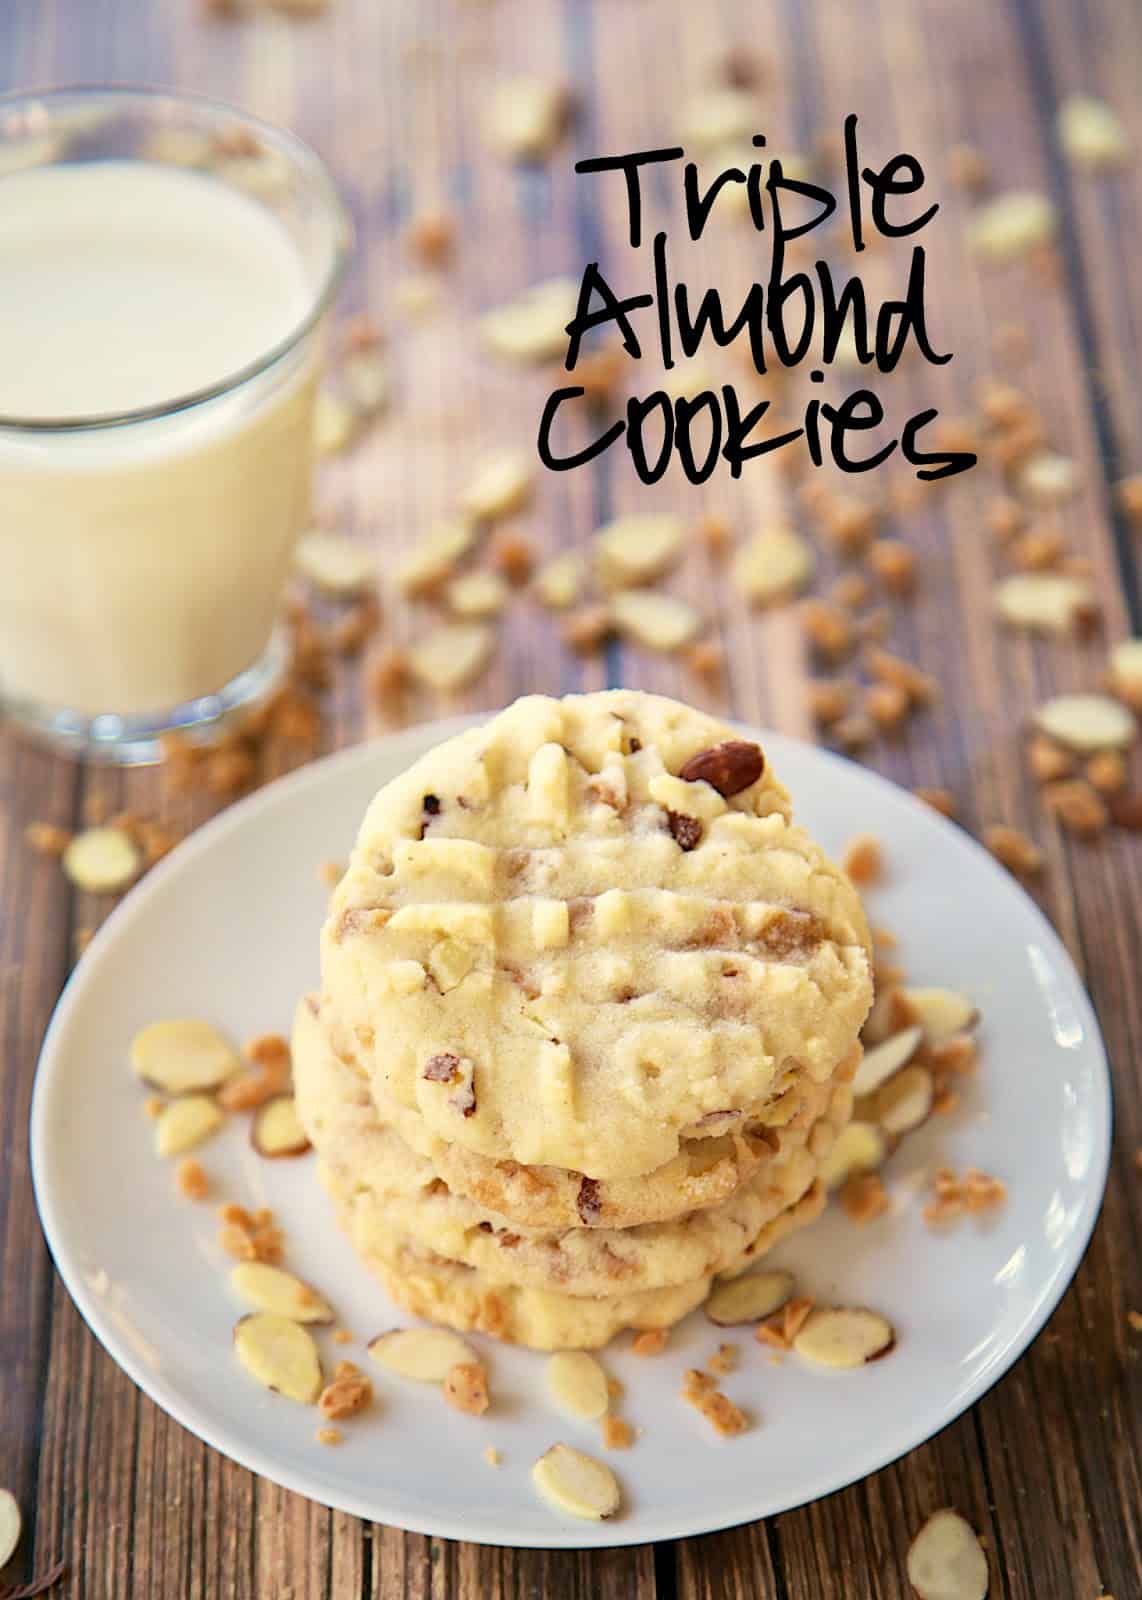 Triple Almond Cookies Recipe - cookies packed with tons of great almond flavor - almond extract, chopped almonds and almond toffee bits! We ate WAY too many of these cookies. Makes a ton. Great for a potluck!